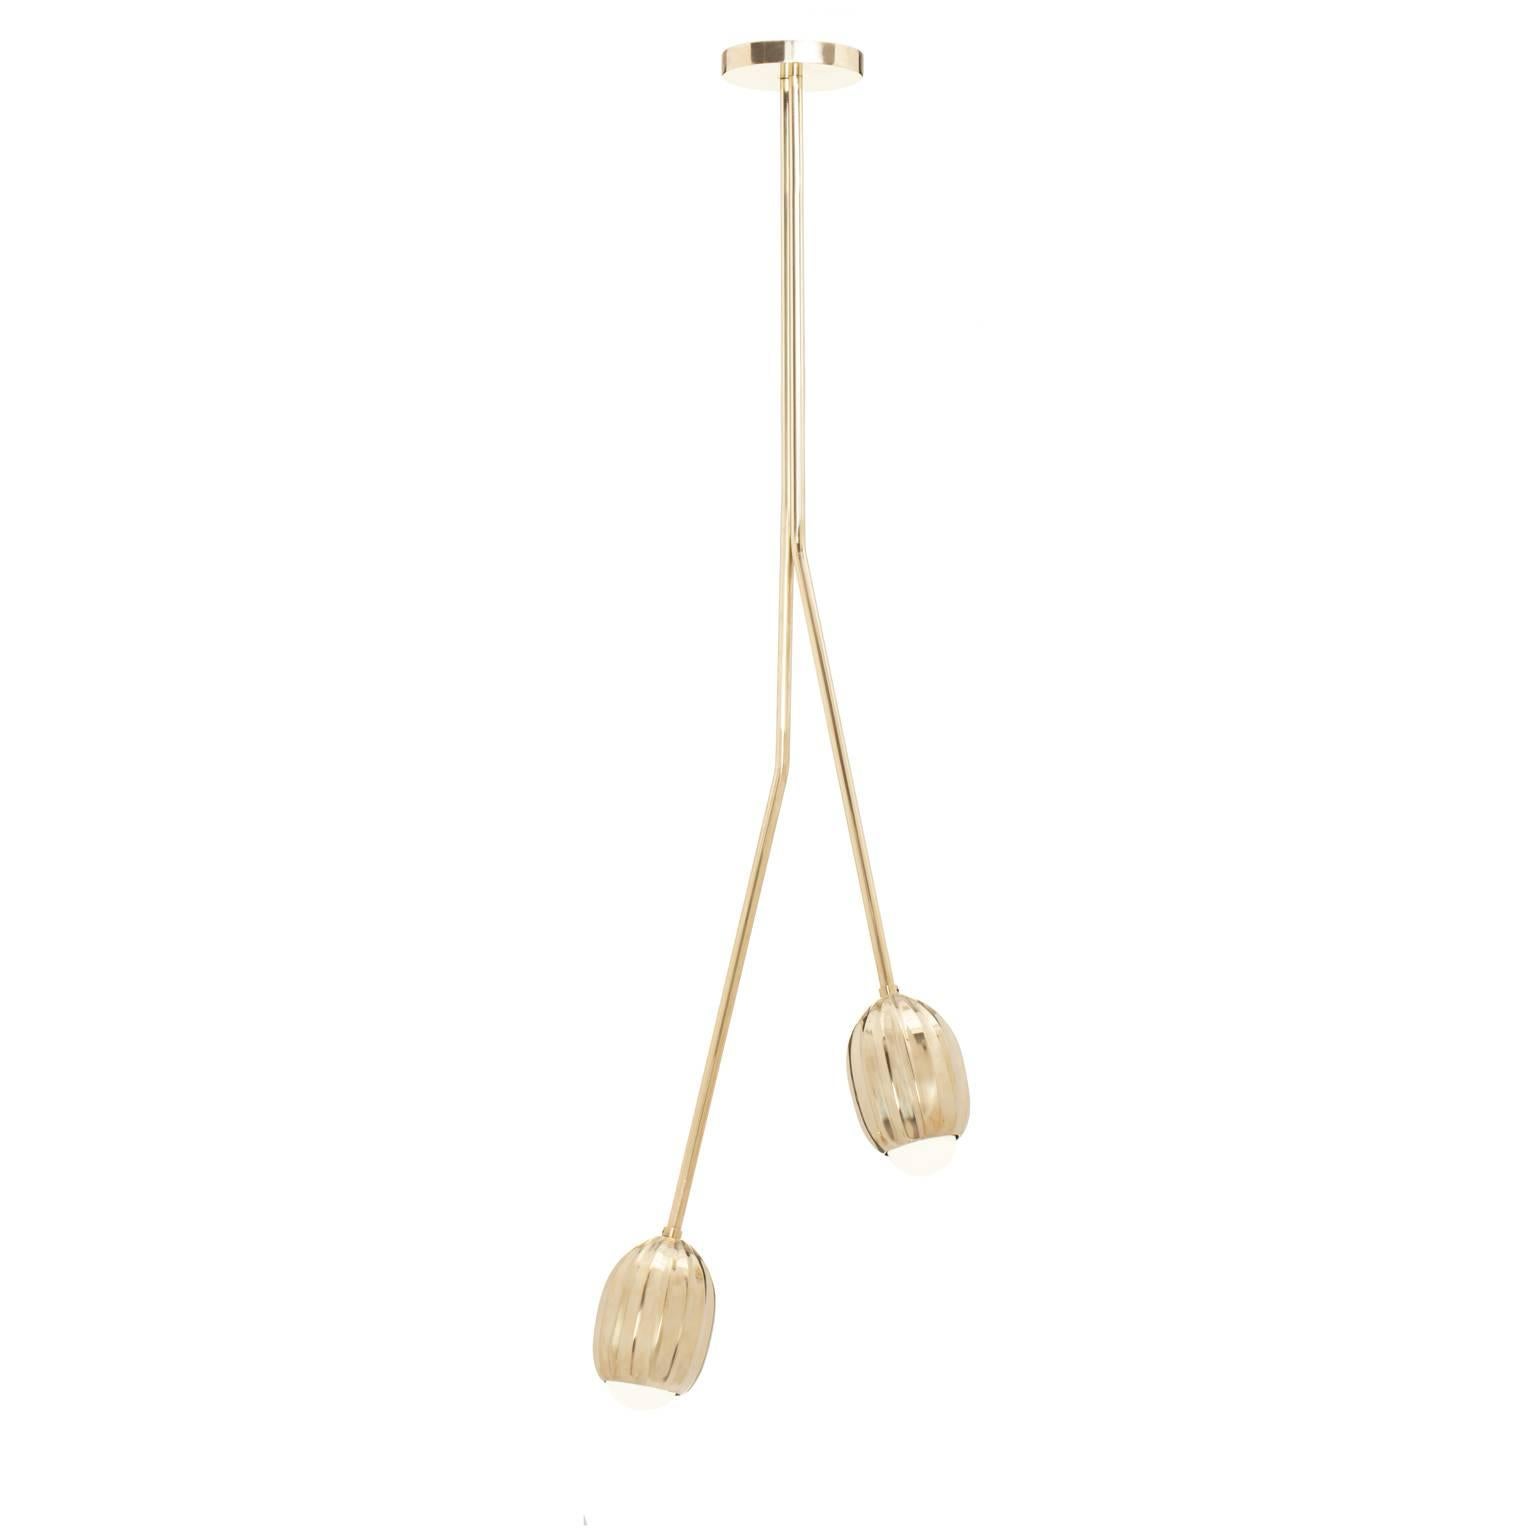 Combining stems that carry the blooming buds, from a couple that looks simply poetic, up to a whole bouquet that appears extravagantly scenic. Lost wax cast by master craftsmen in Tuscany, Italy. 

This listing is for a brass chandelier composed of